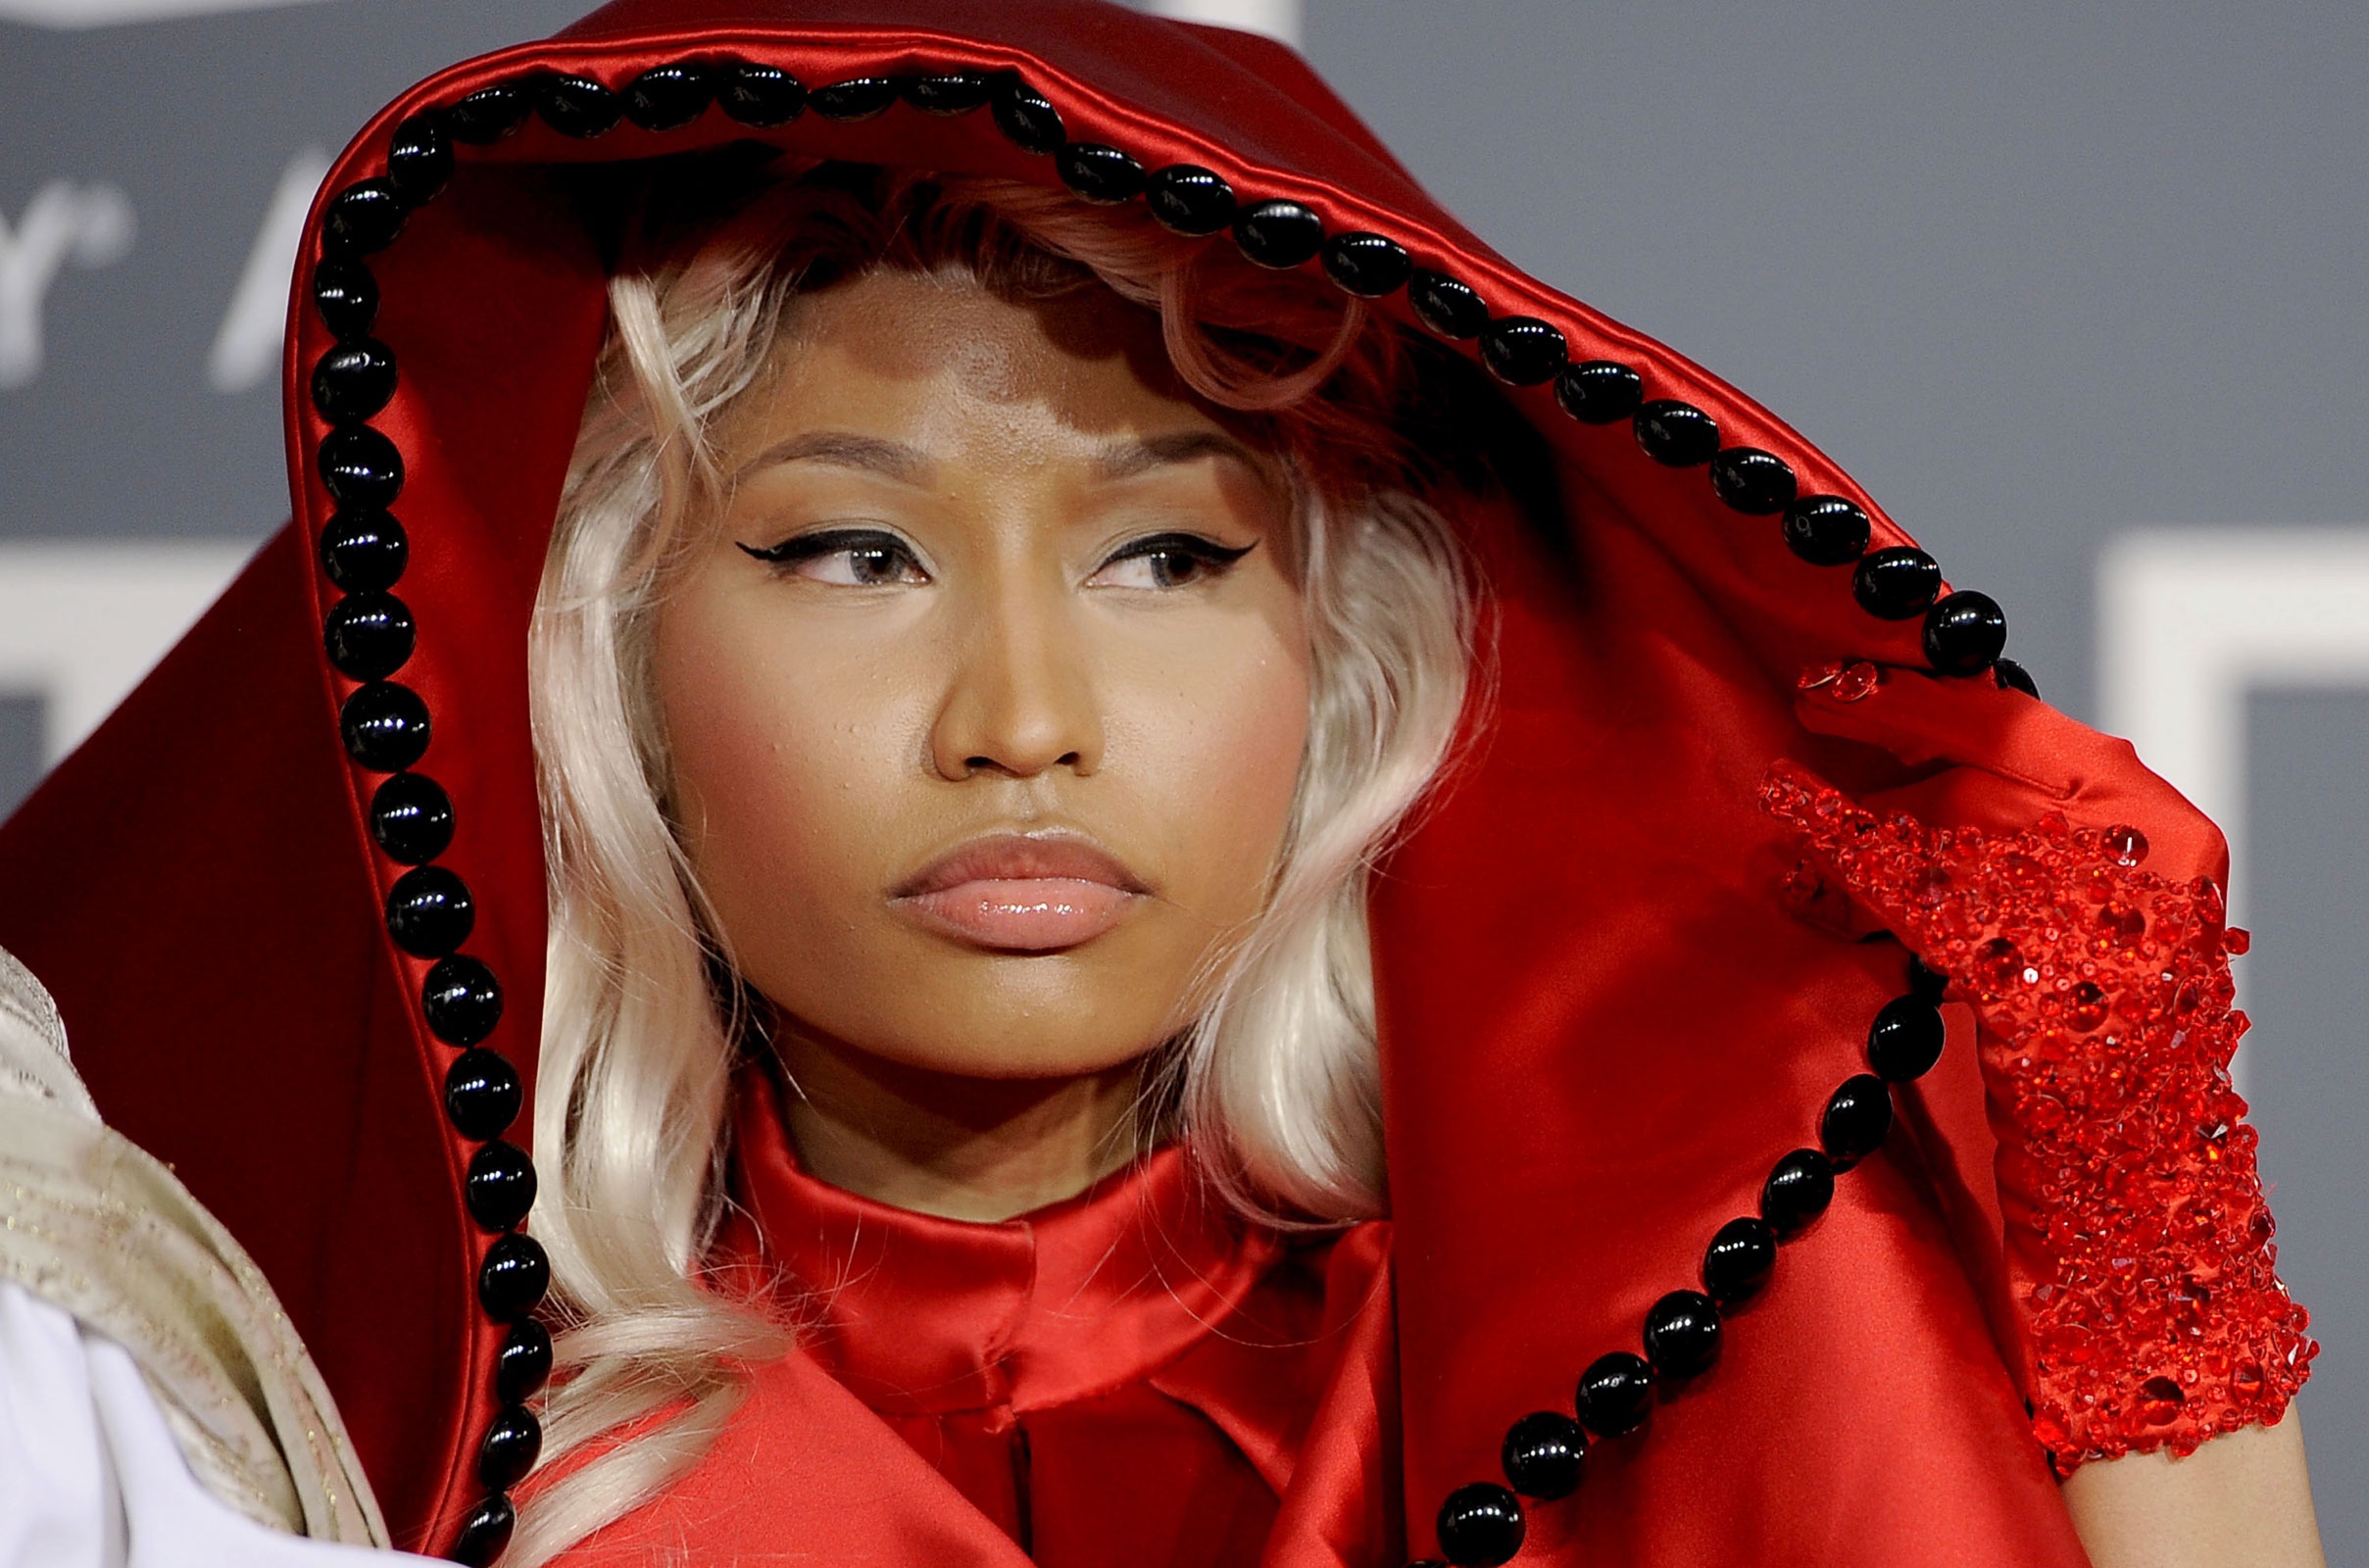 American rapper , Nicki Minaj sued over ‘I Lied’ hit song after being accused of ripping off beat